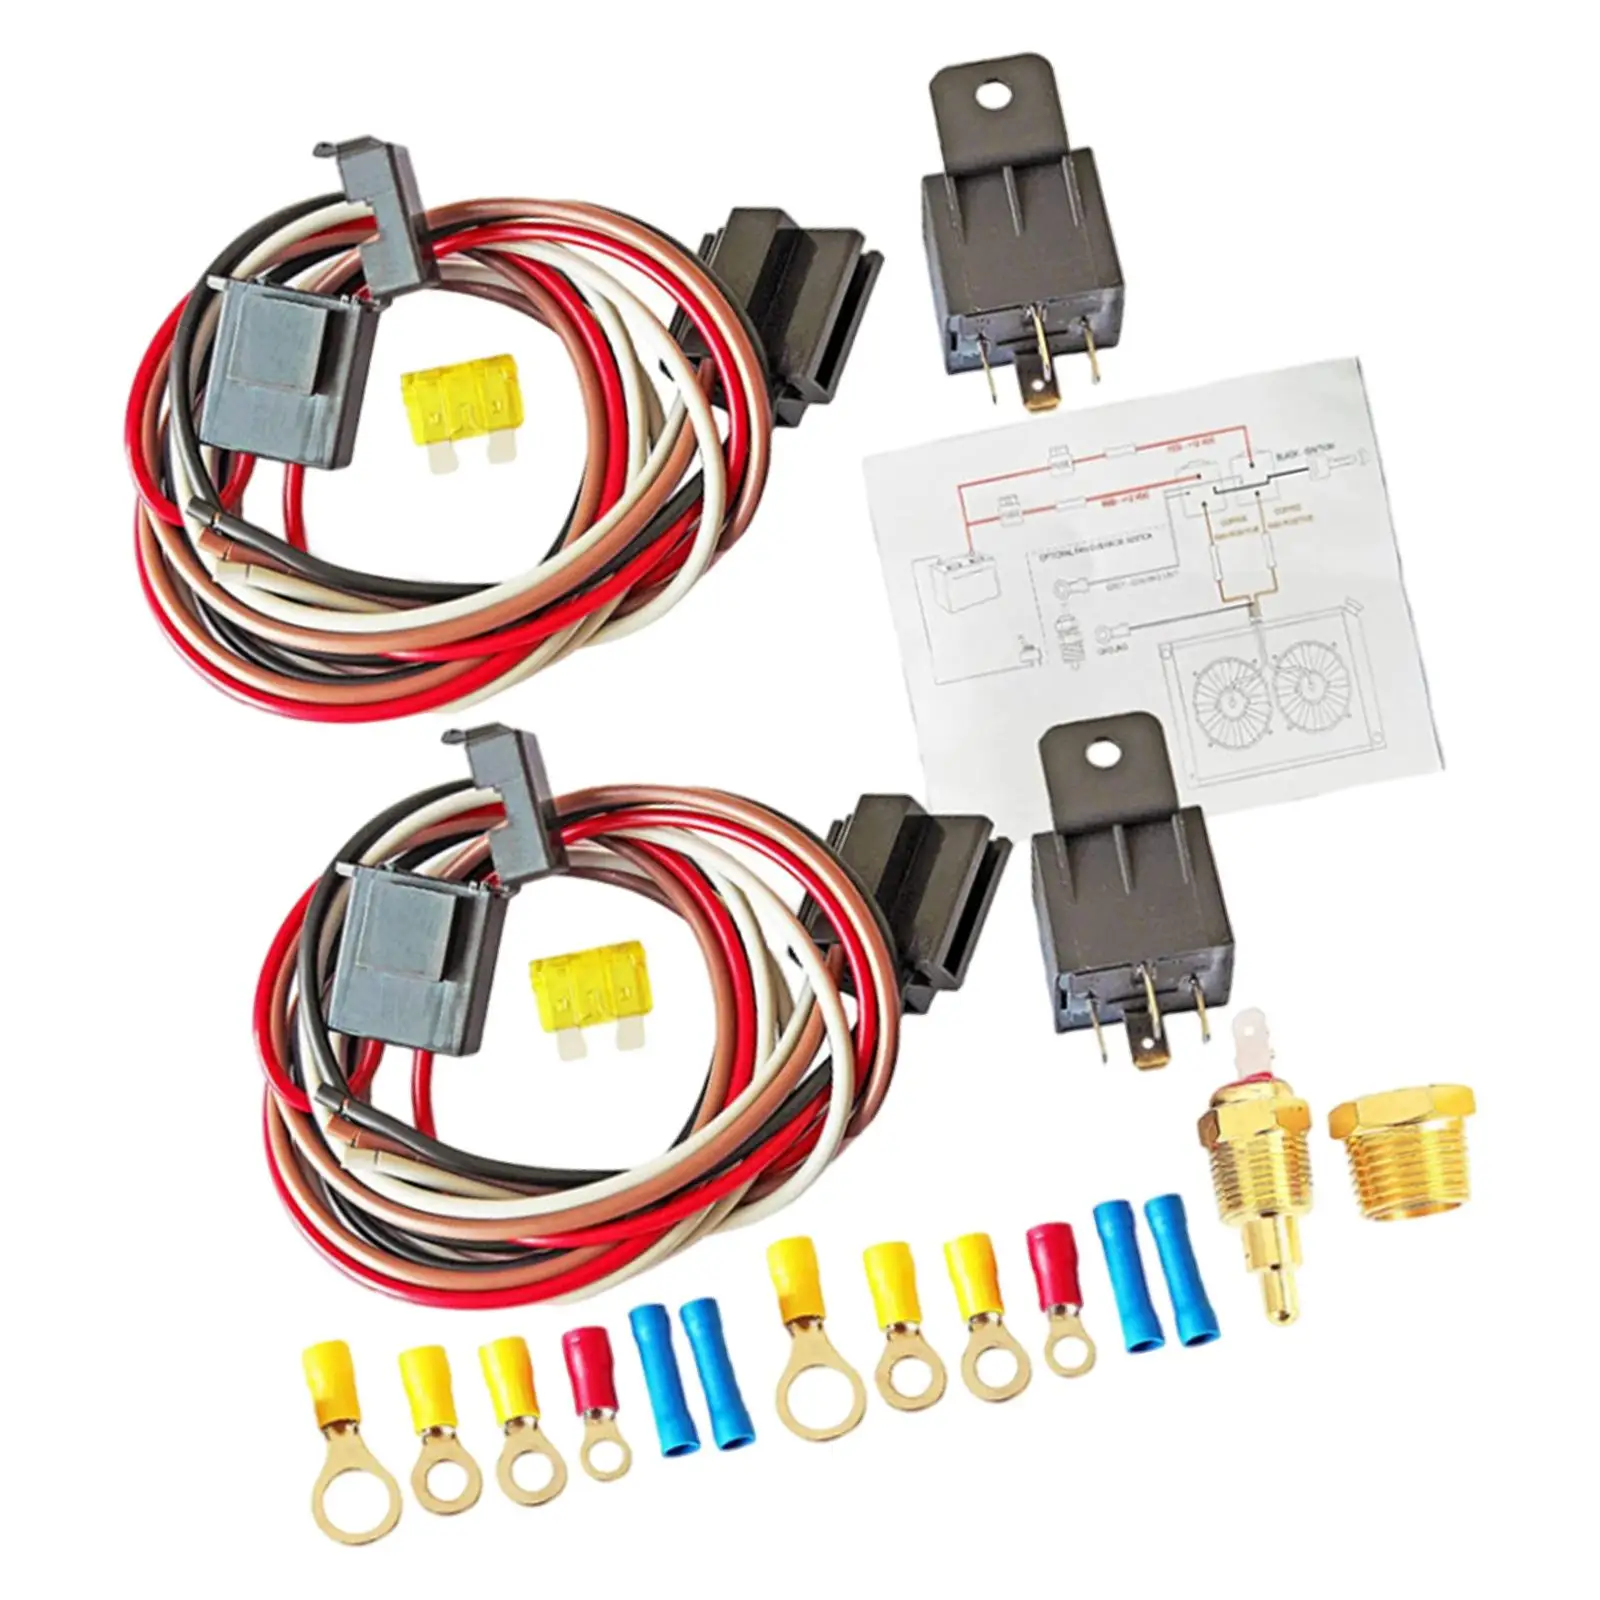 40 Amp Dual Electric Fan Wiring Kit Wiring Relay Kit Automotive Wire Harness Temperature Switch Replacement Easy to Install ACC